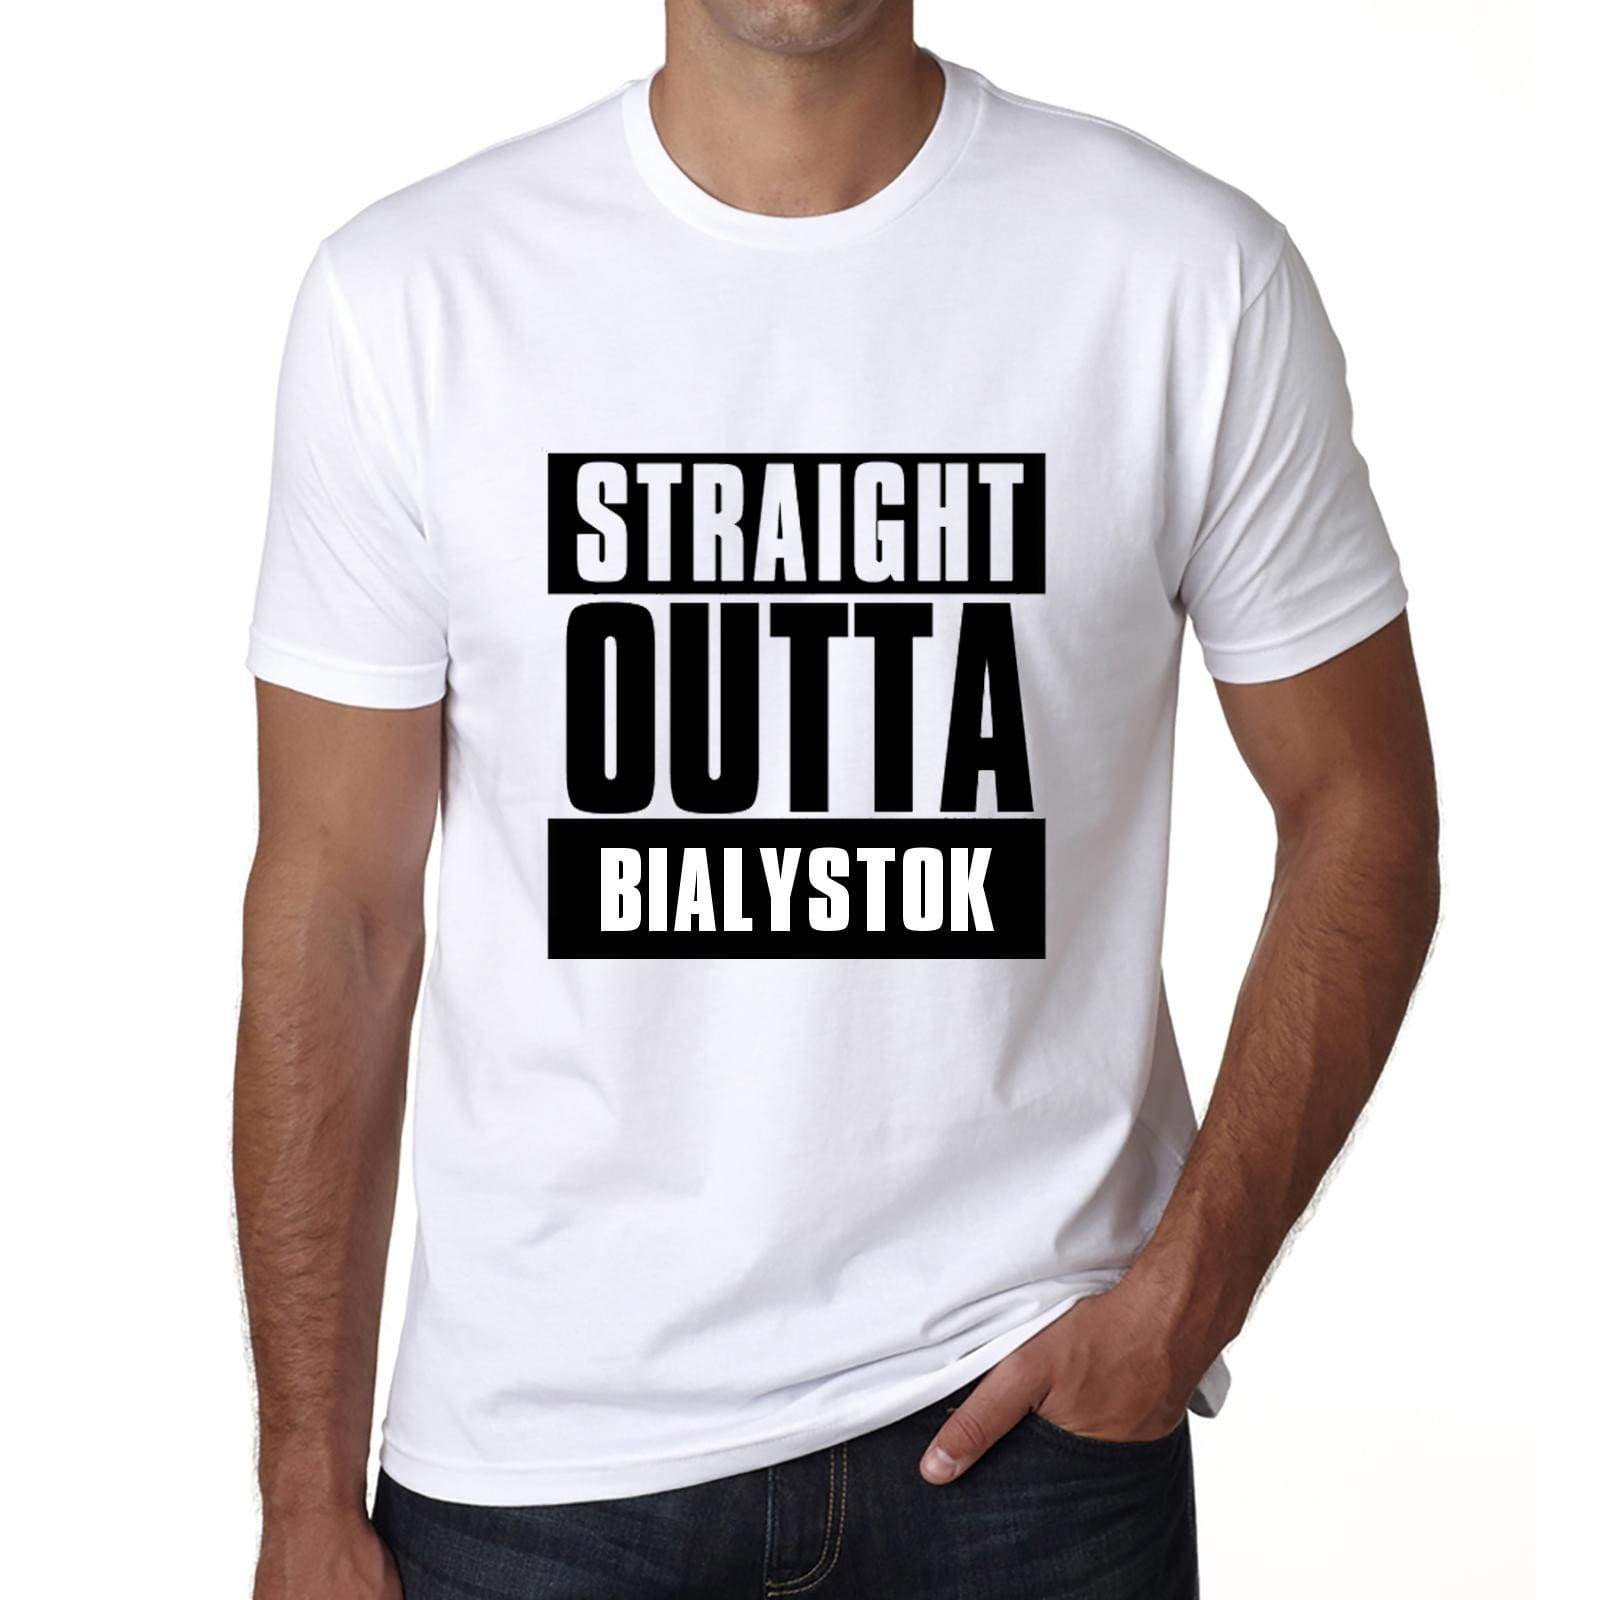 Straight Outta Bialystok Mens Short Sleeve Round Neck T-Shirt 00027 - White / S - Casual